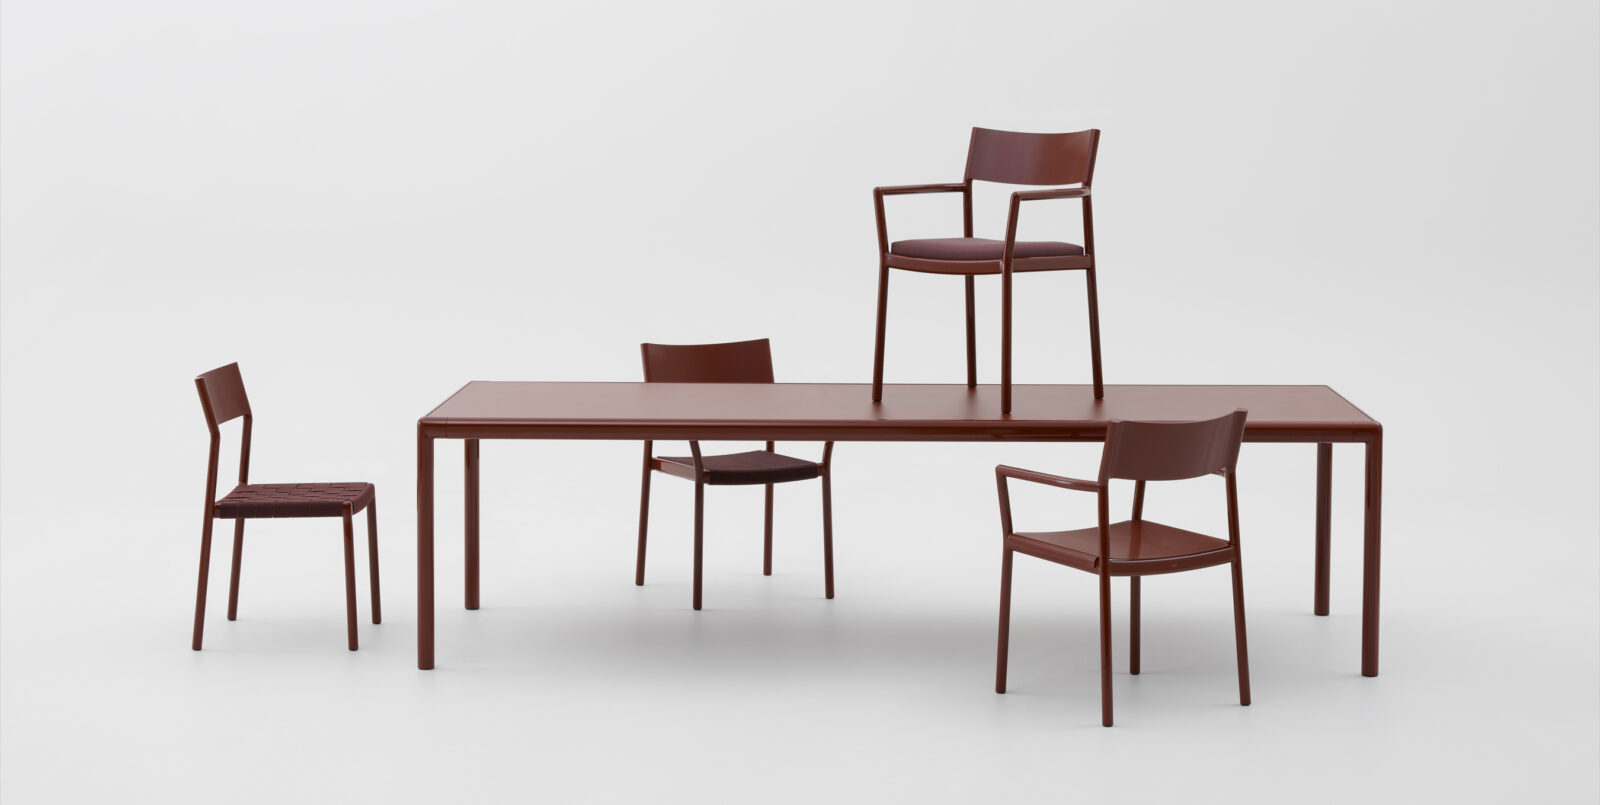 Kettal – Passage chair collection